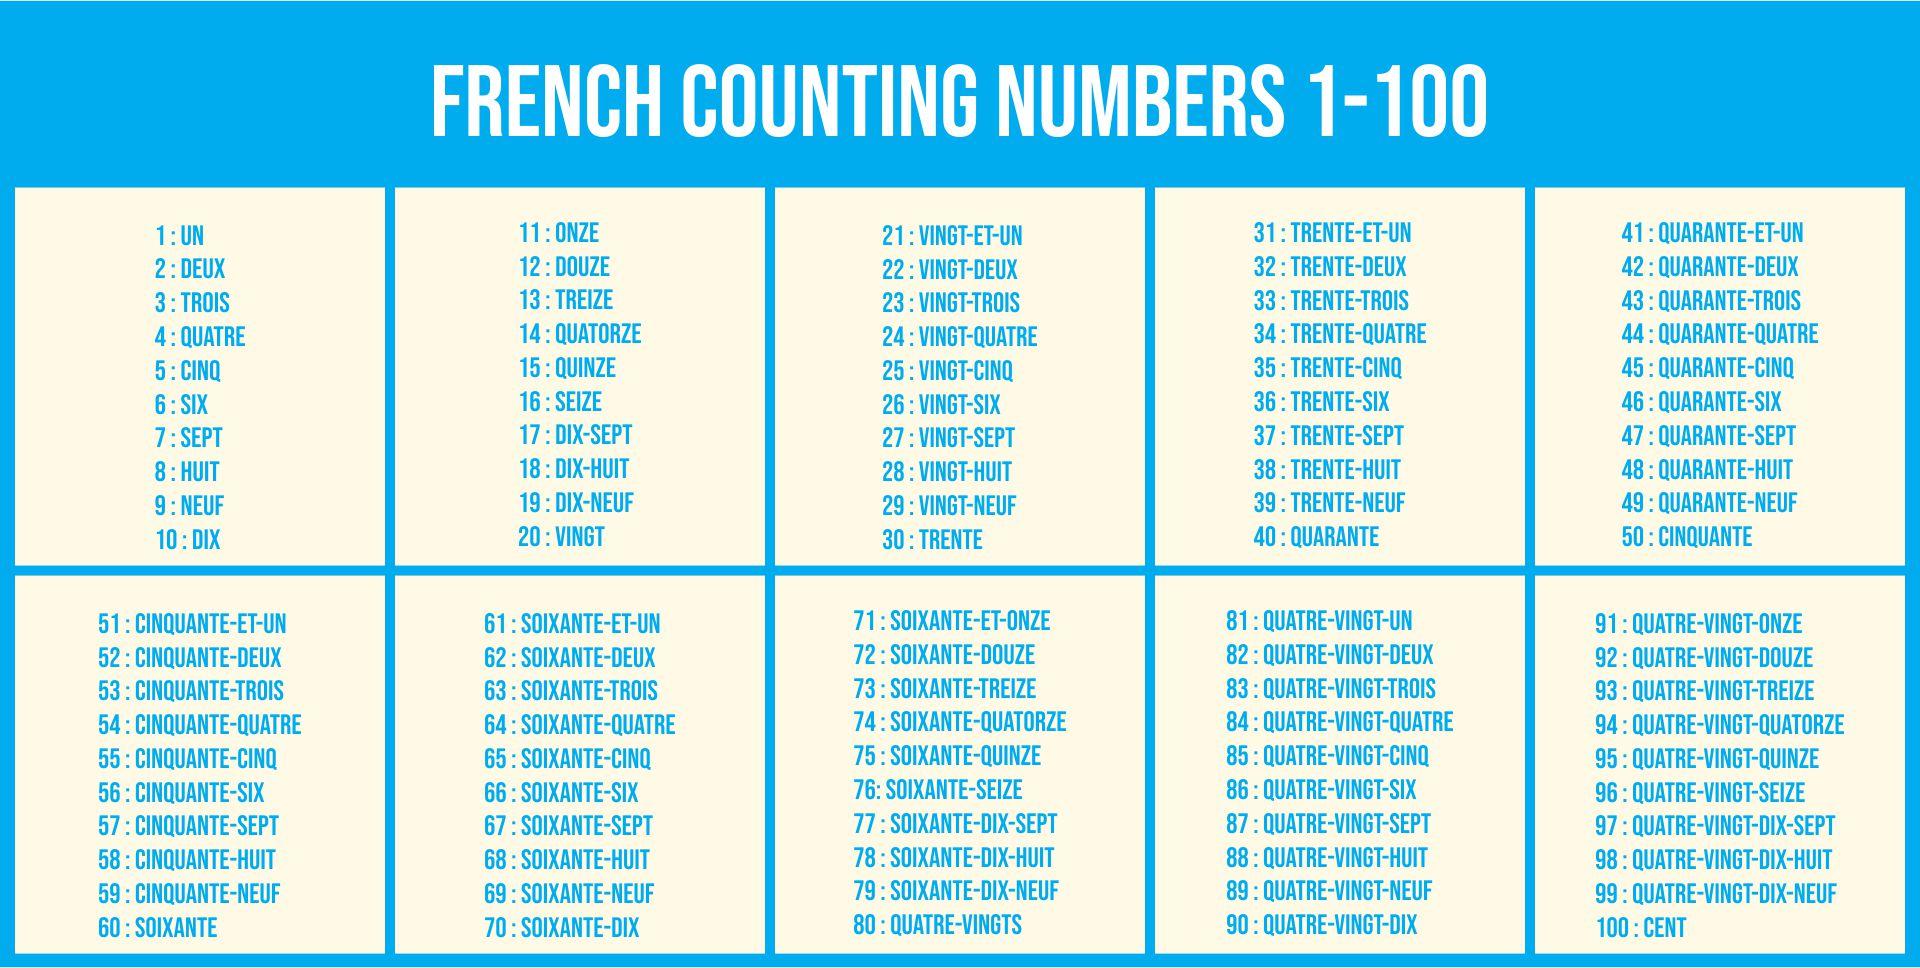 number-printable-images-gallery-category-page-27-printableecom-french